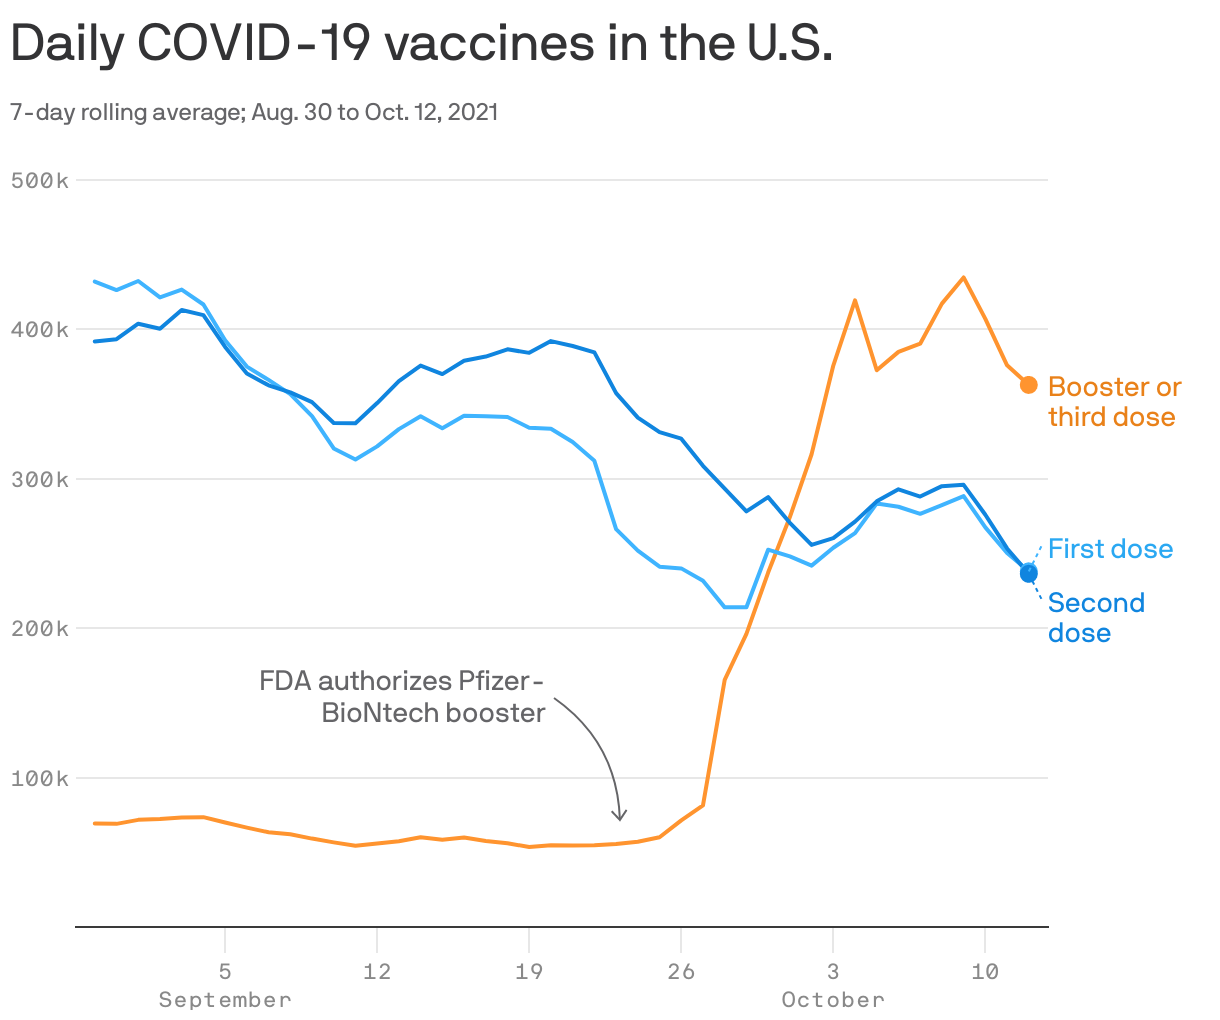 Daily COVID-19 vaccines in the U.S.